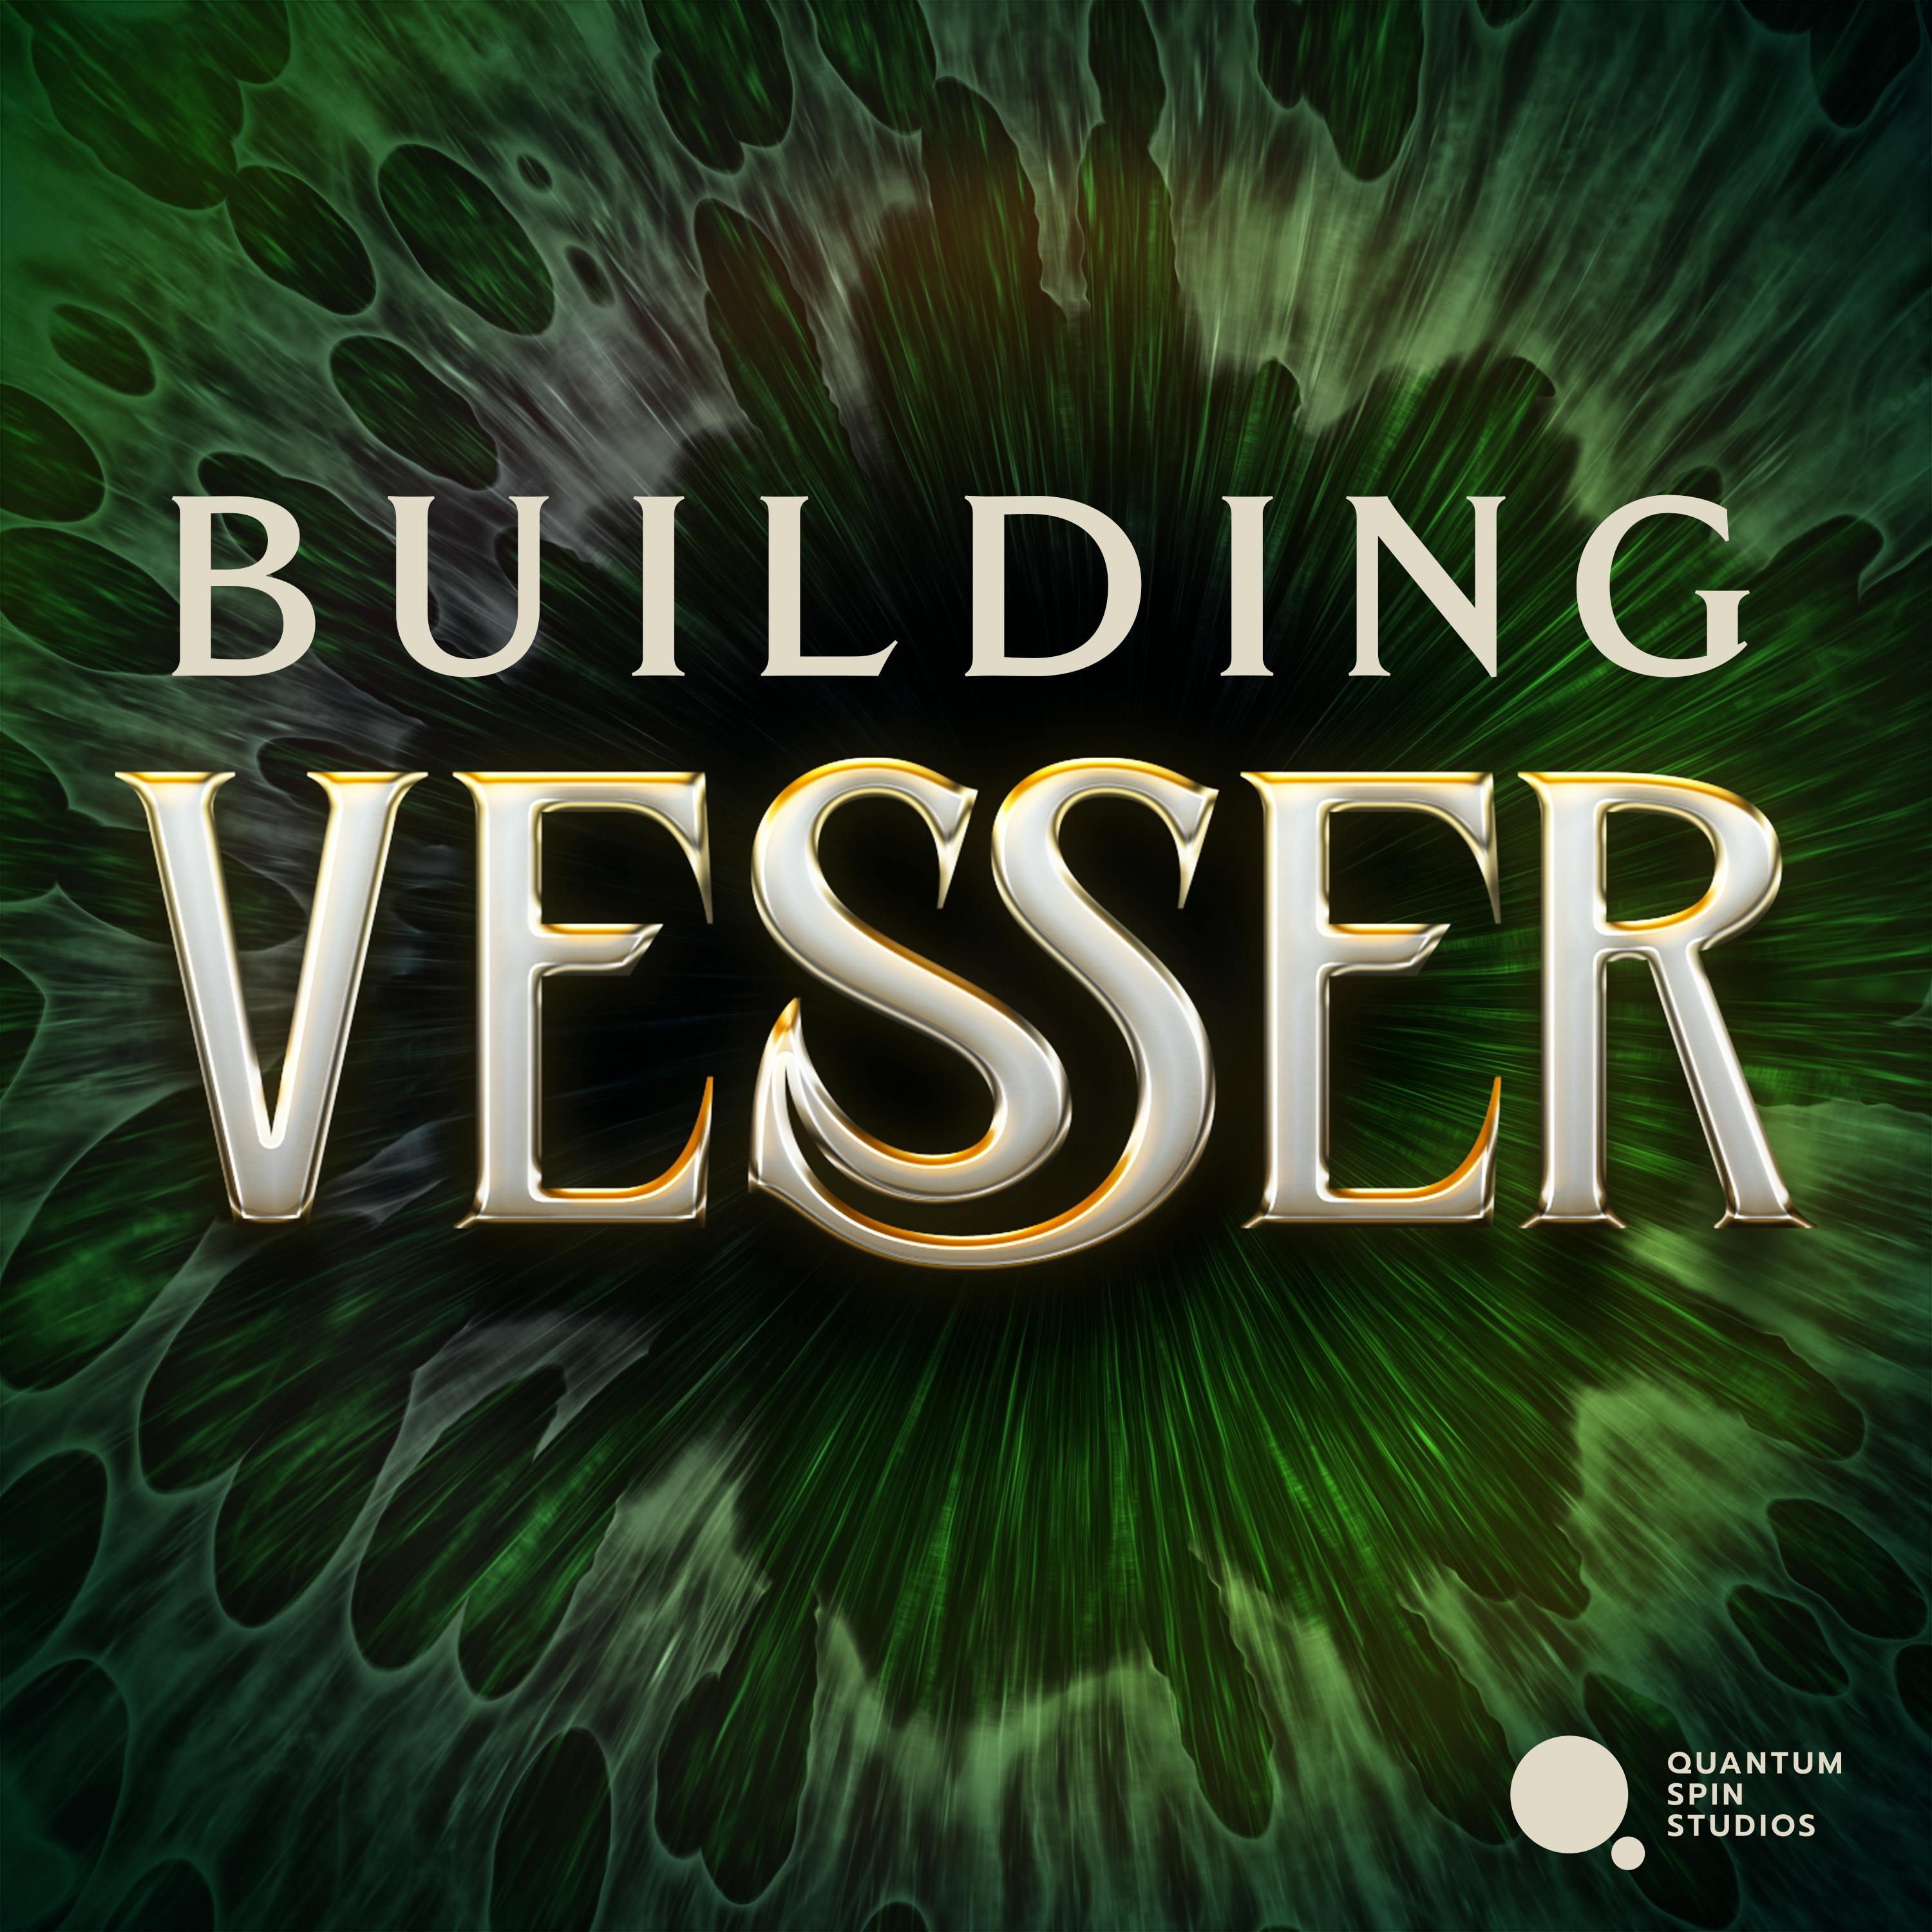 Building Vesser: The 24 Exalted, Continuity, and Baldur’s Gate 3